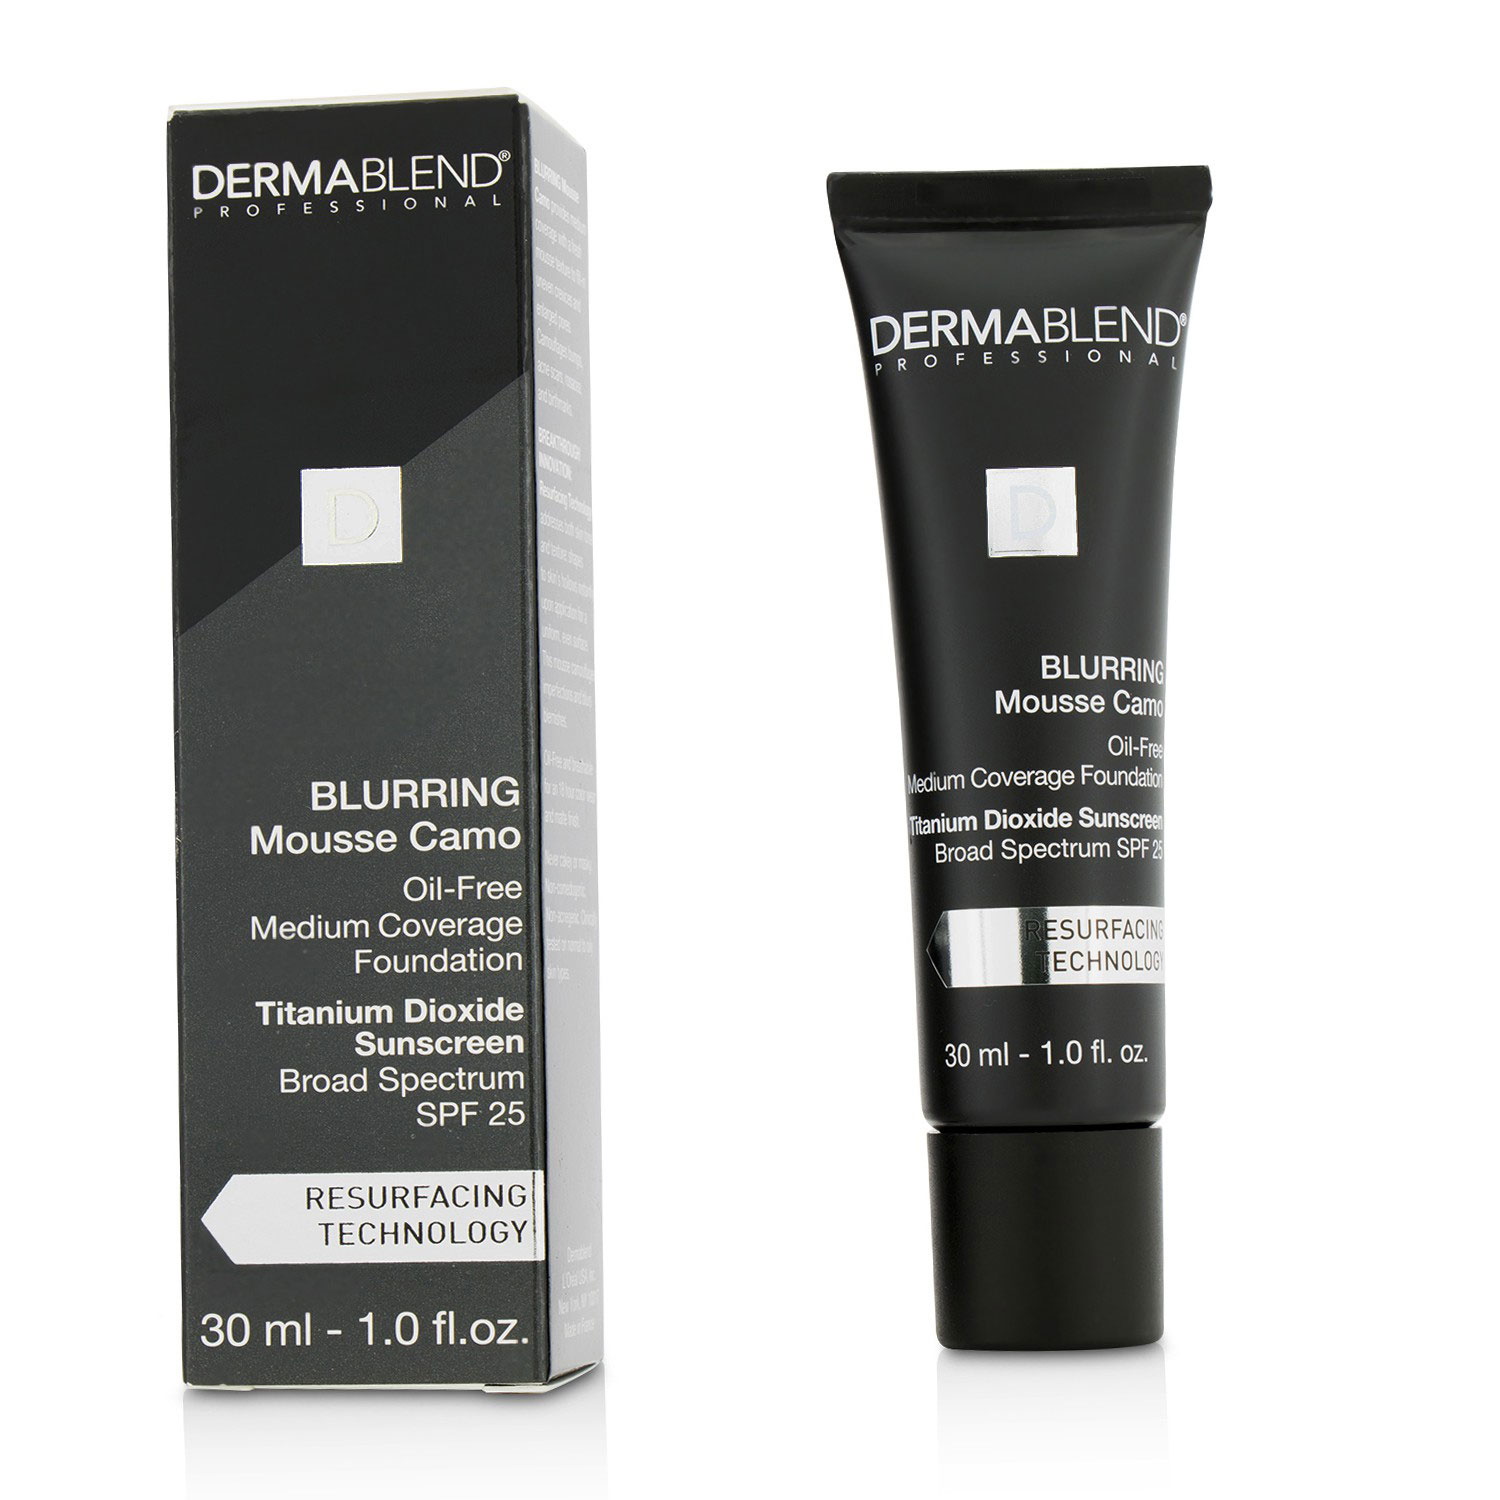 Blurring Mousee Camo Oil Free Foundation SPF 25 (Medium Coverage) - #30C Cameo Dermablend Image